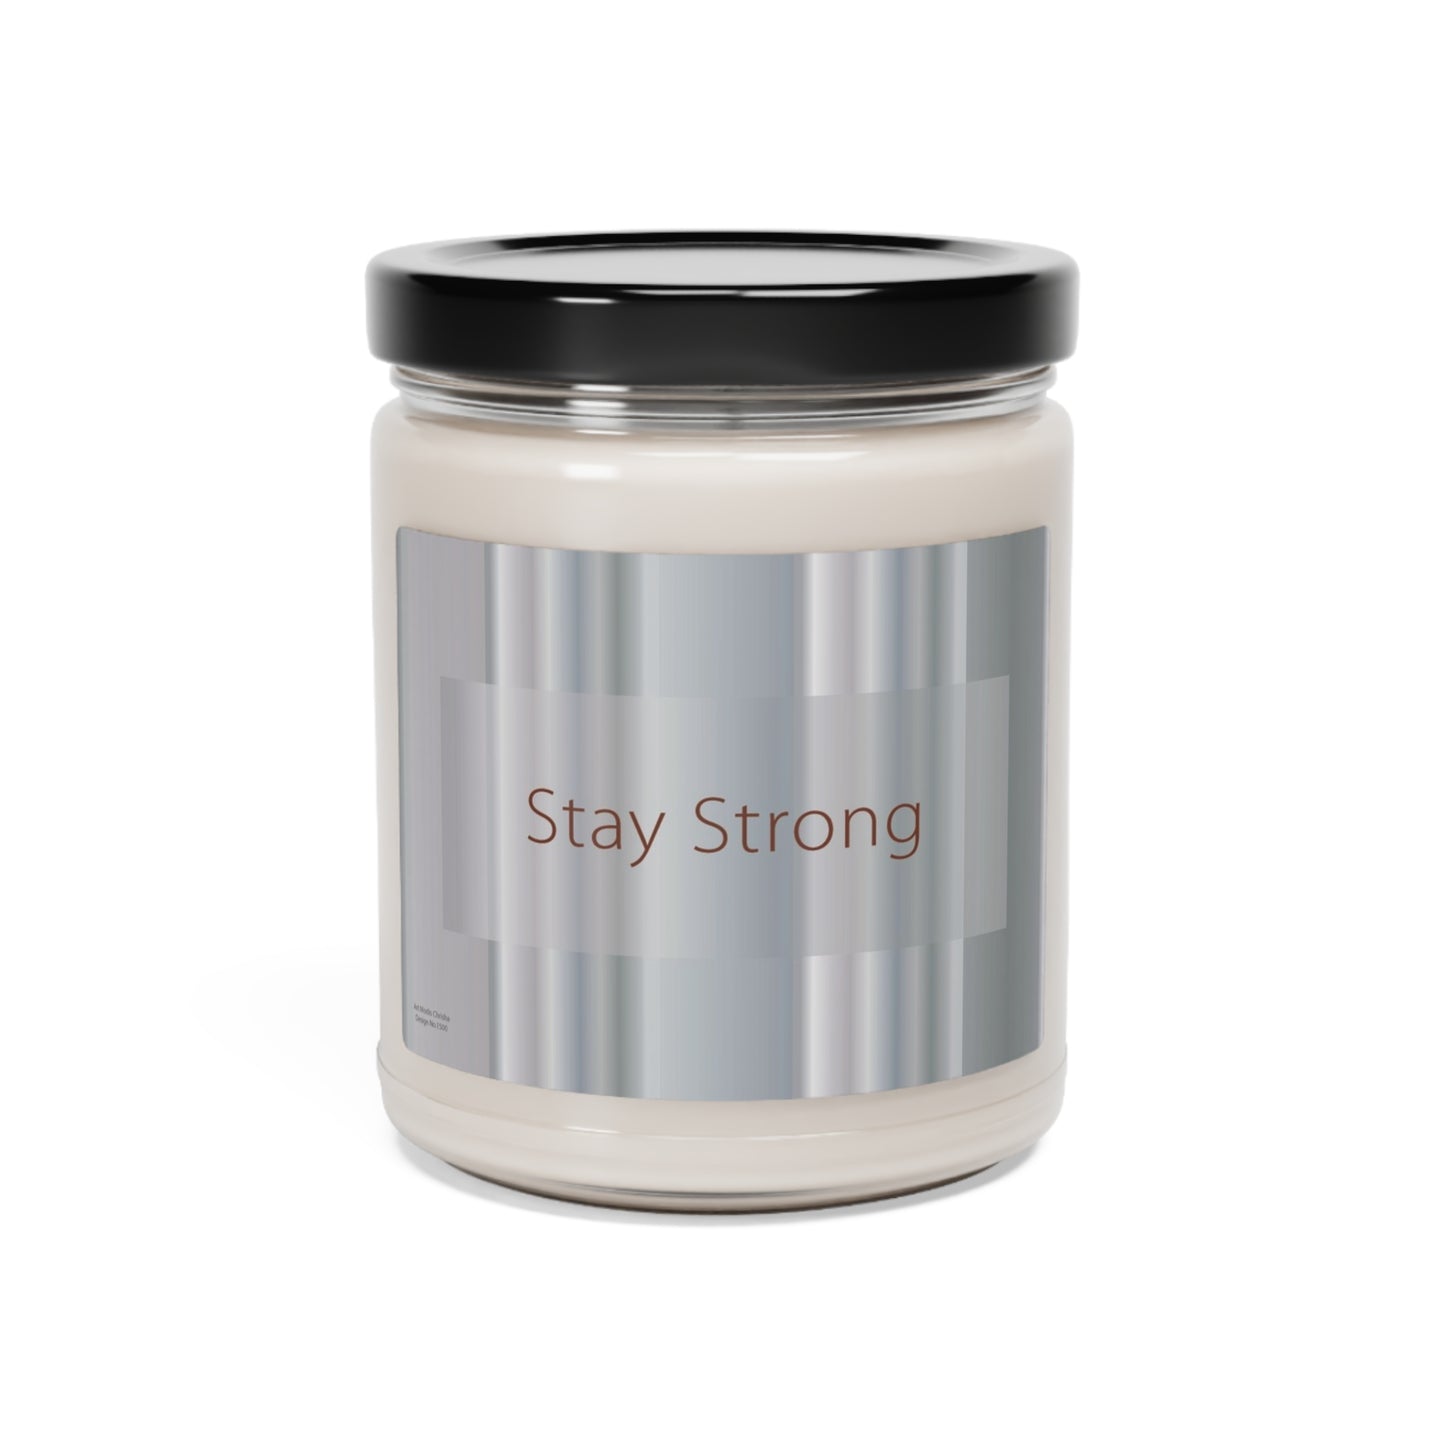 Scented Soy Candle, 9oz Stay Strong - Design No.1500